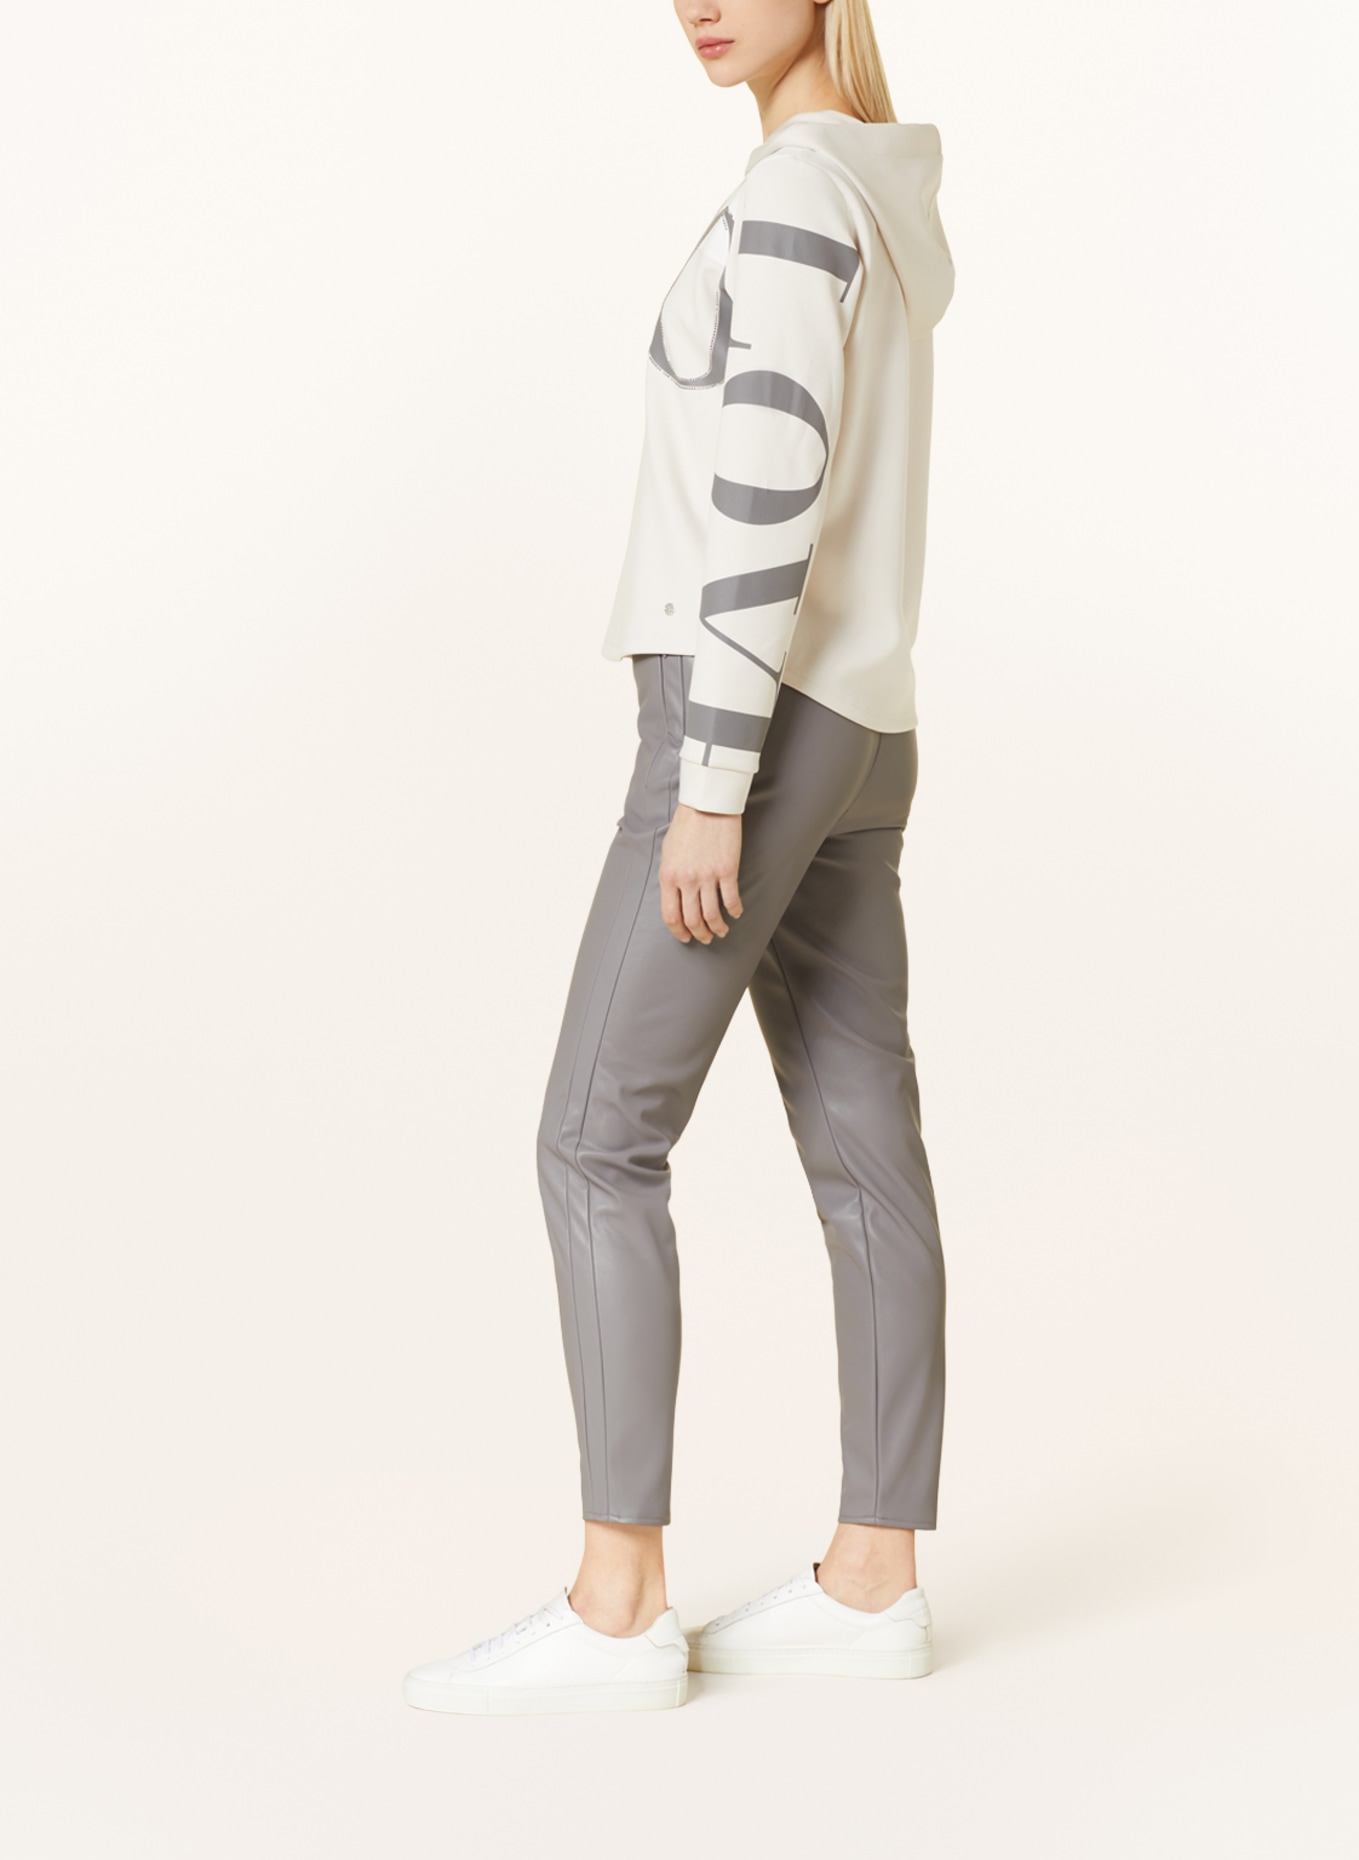 monari Pants in leather look, Color: GRAY (Image 4)